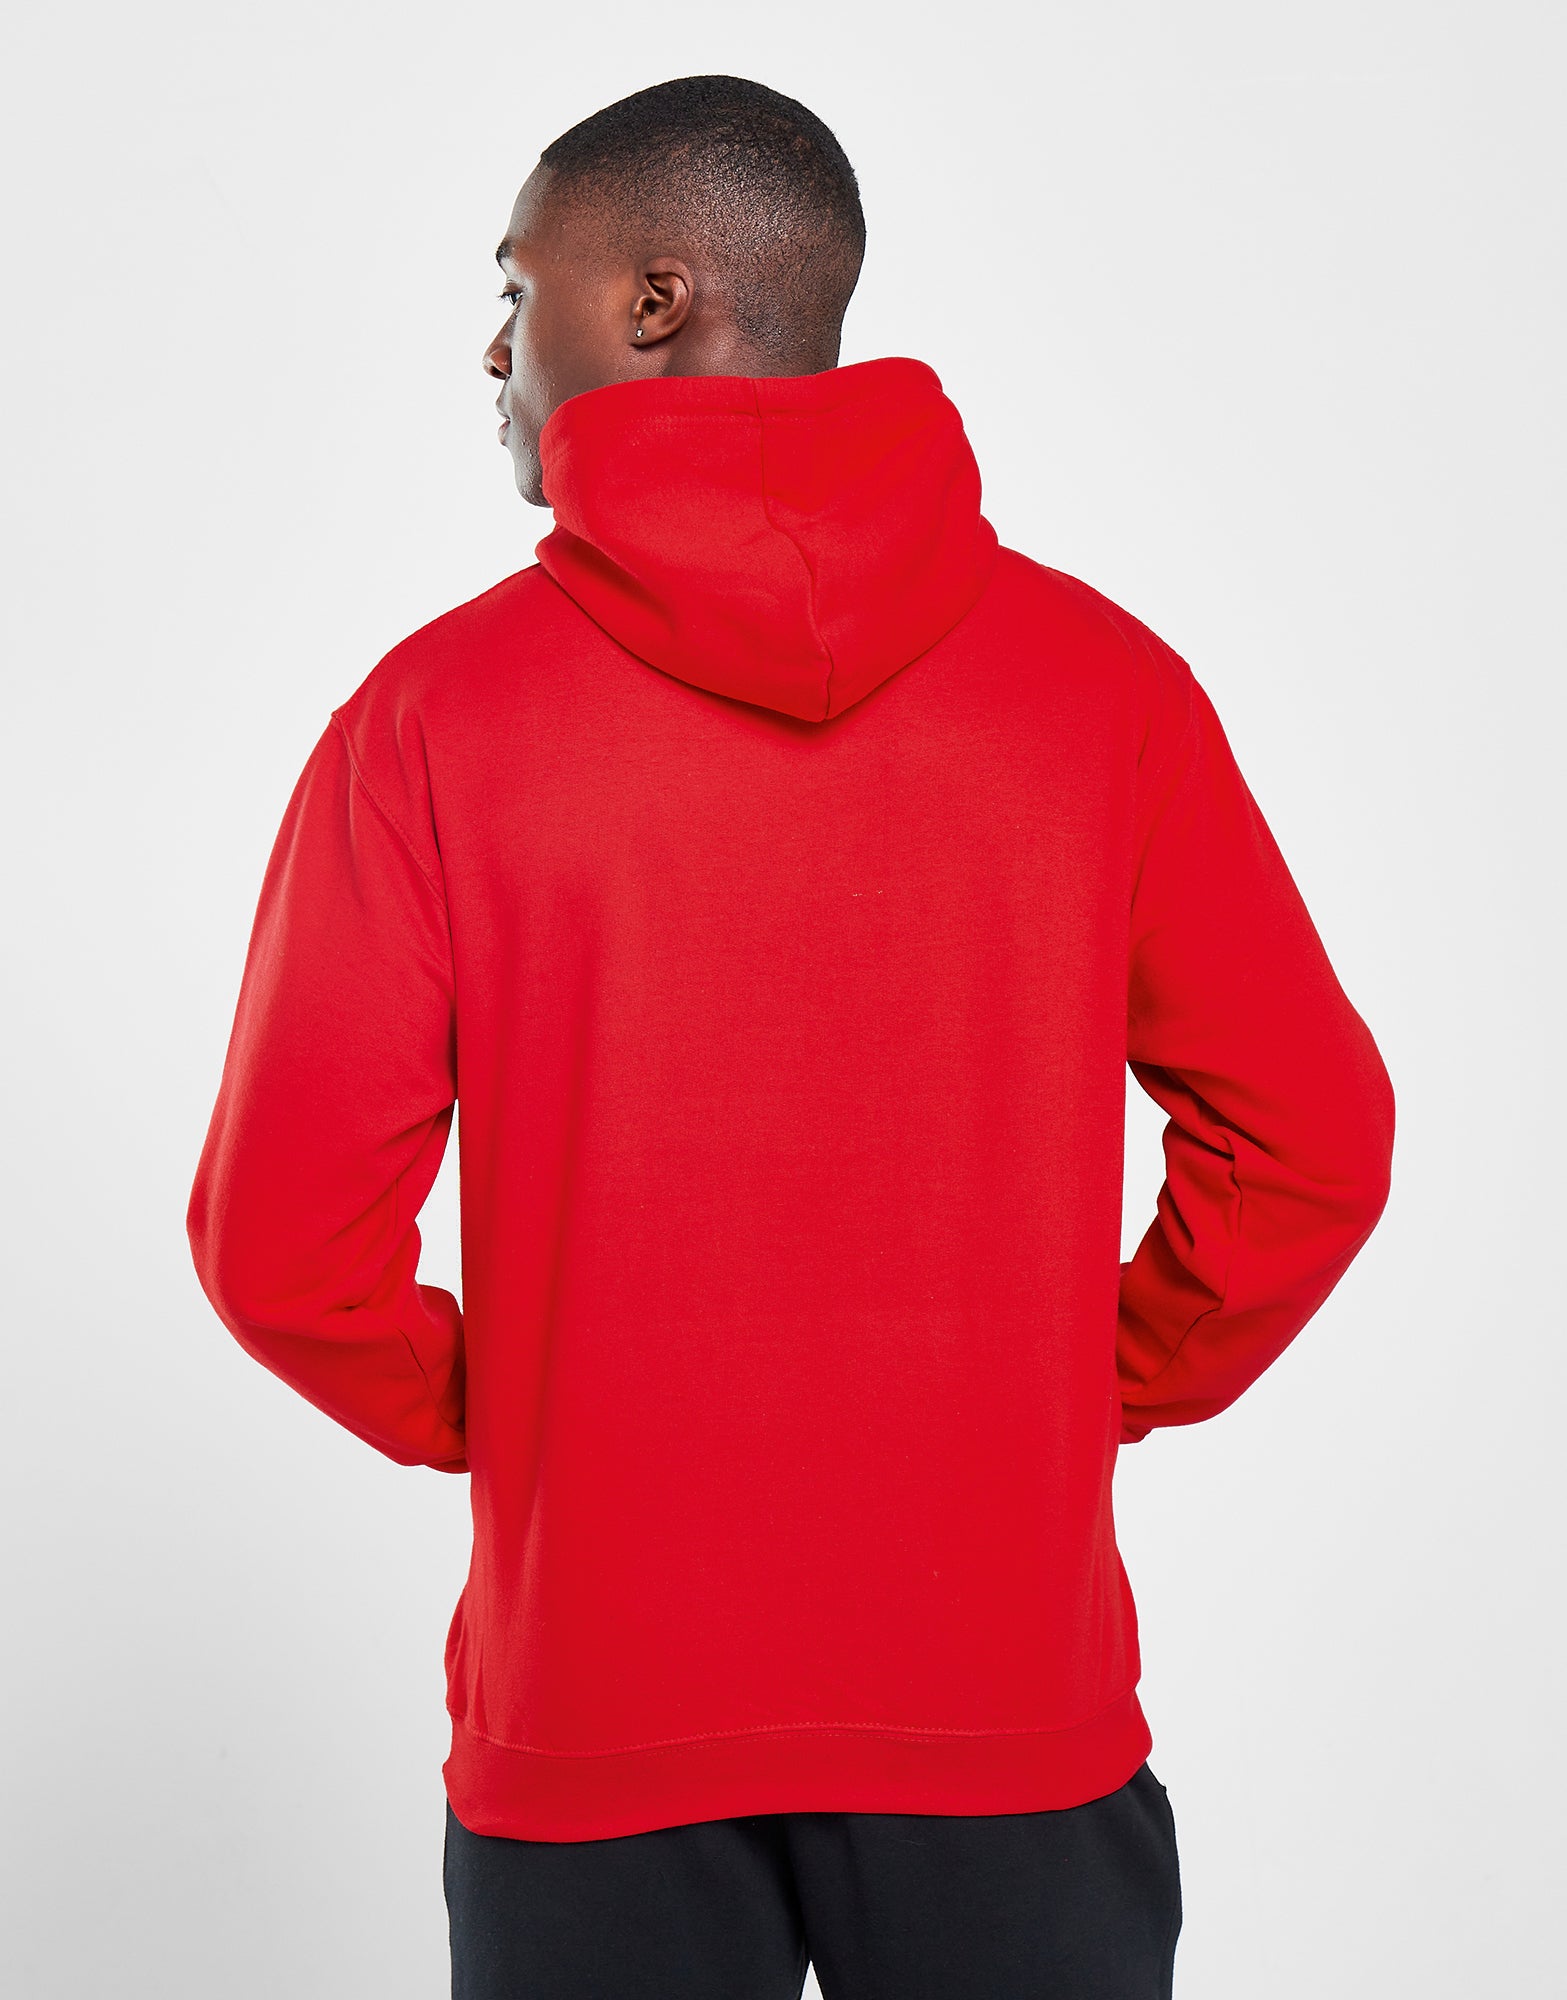 Official Team Wales Hoodie - Red - The World Football Store